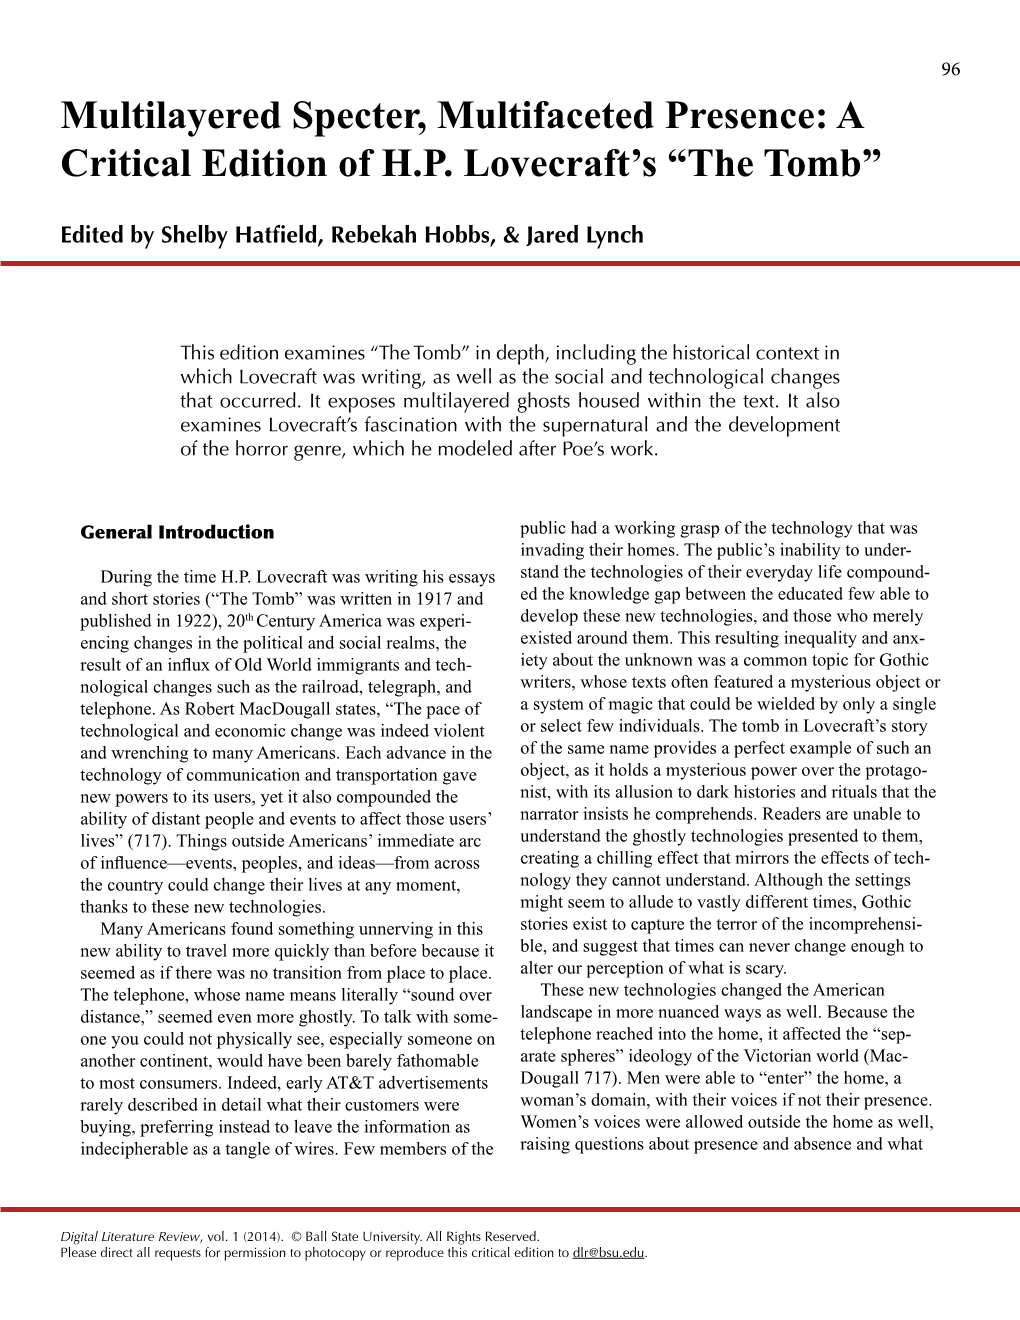 A Critical Edition of HP Lovecraft's